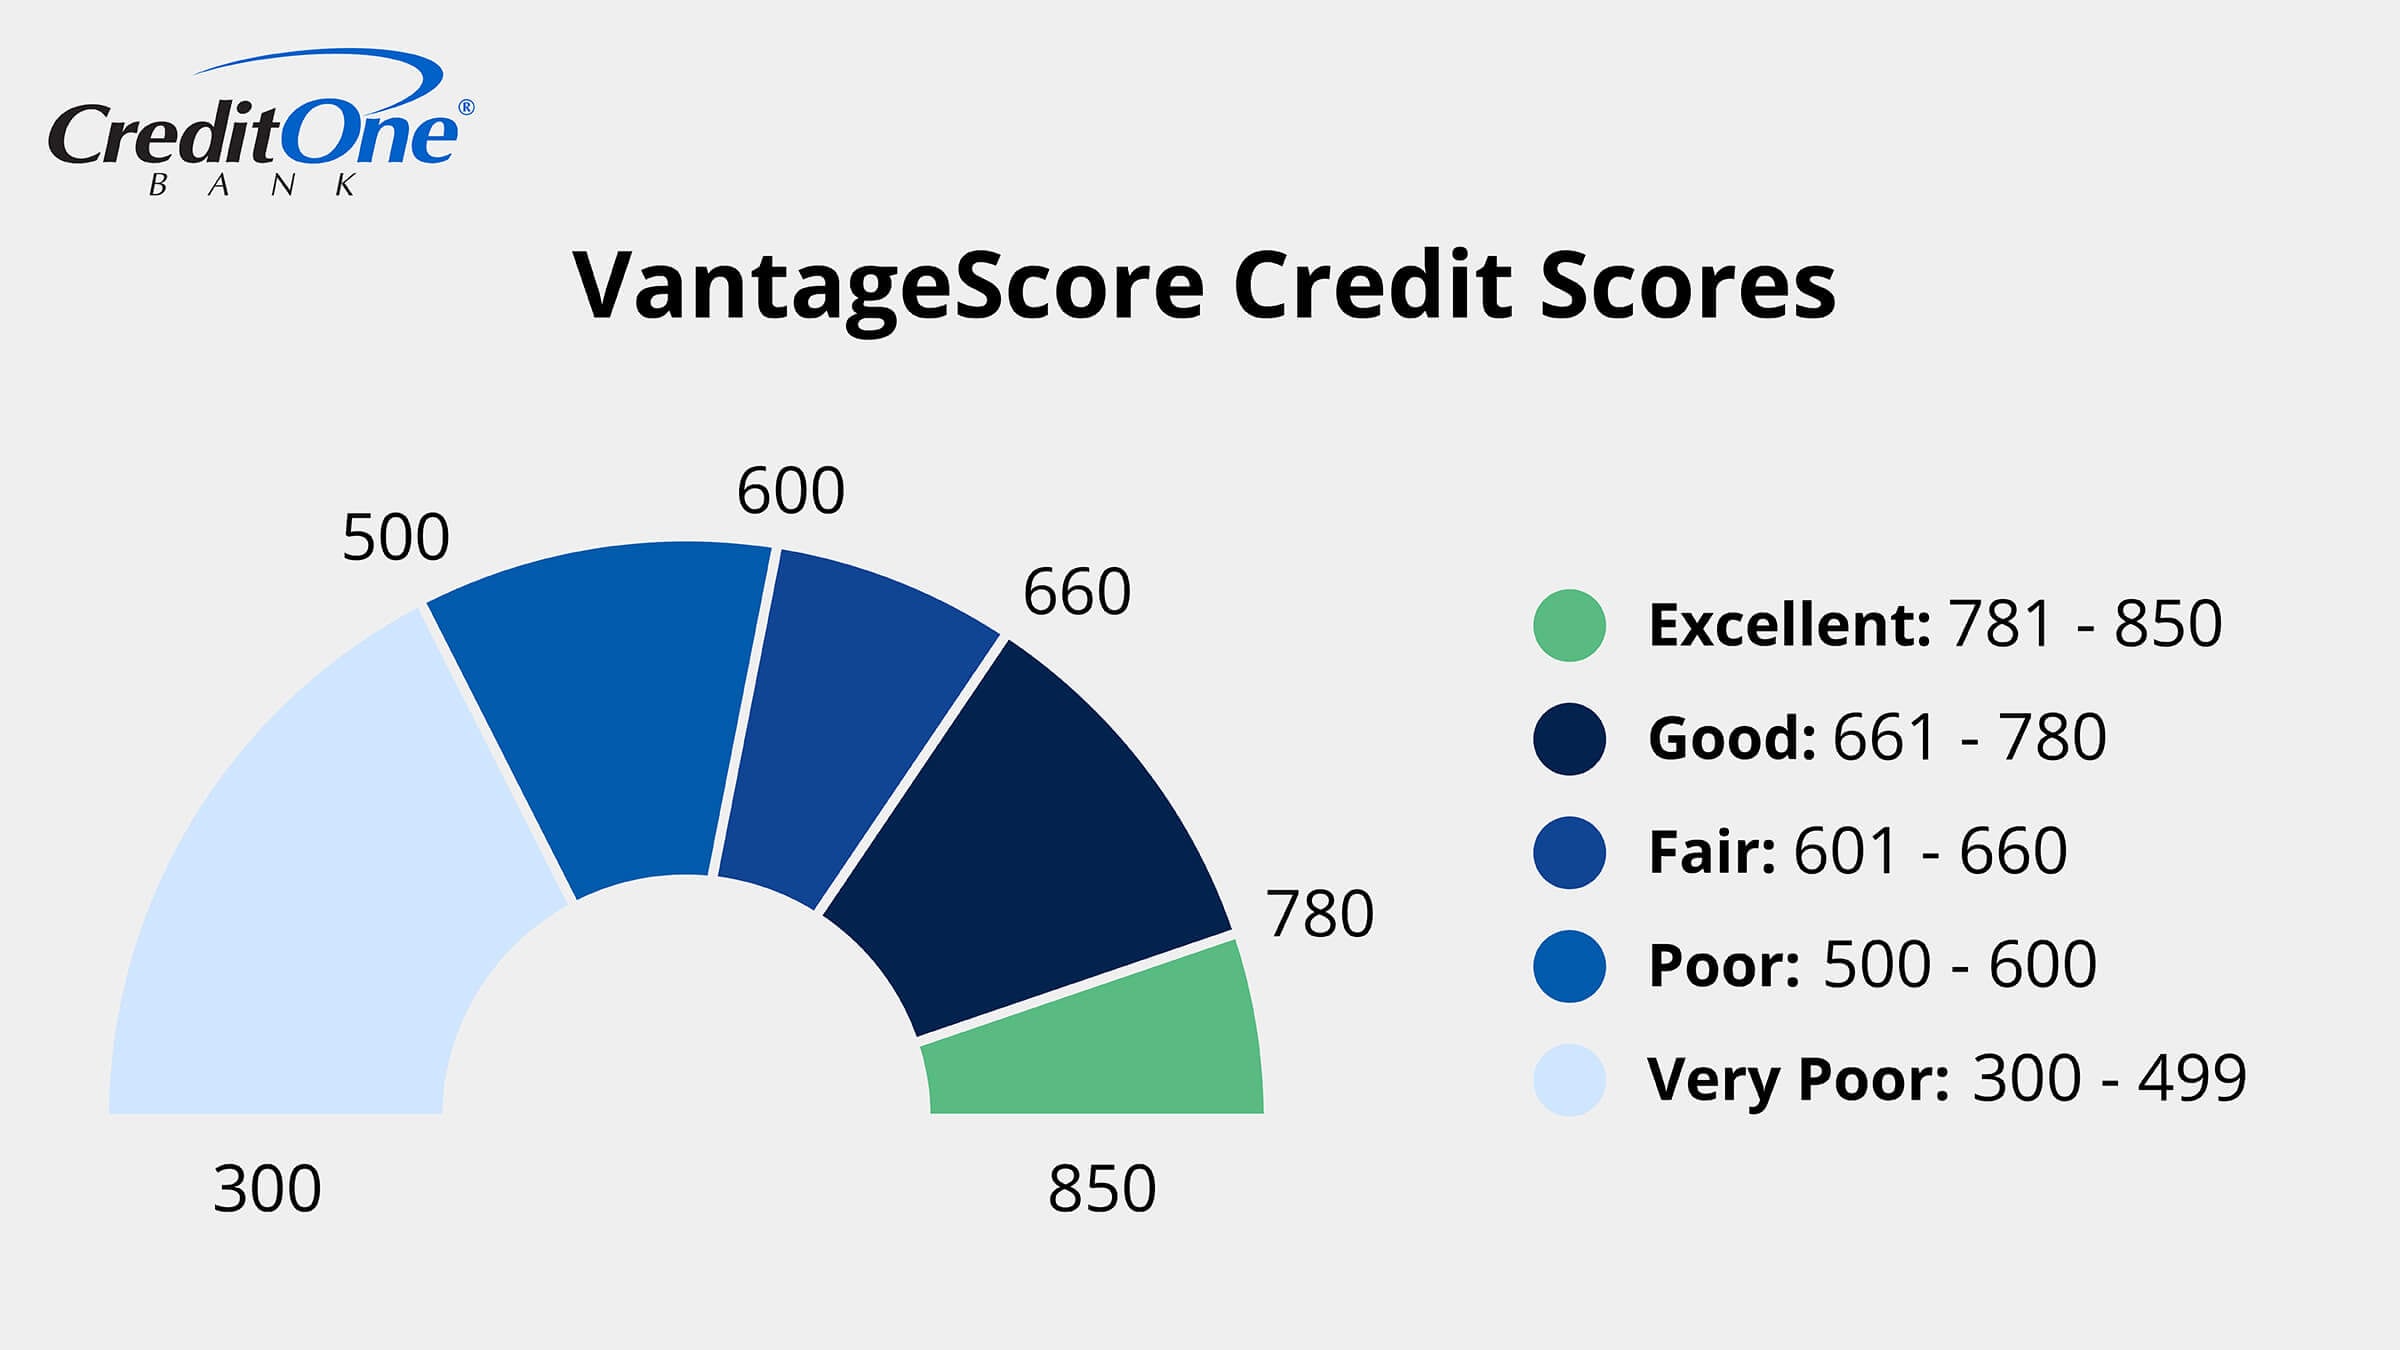 Colored meter depicts the ranges of VantageScore Credit Scores from Exceptional to Poor.